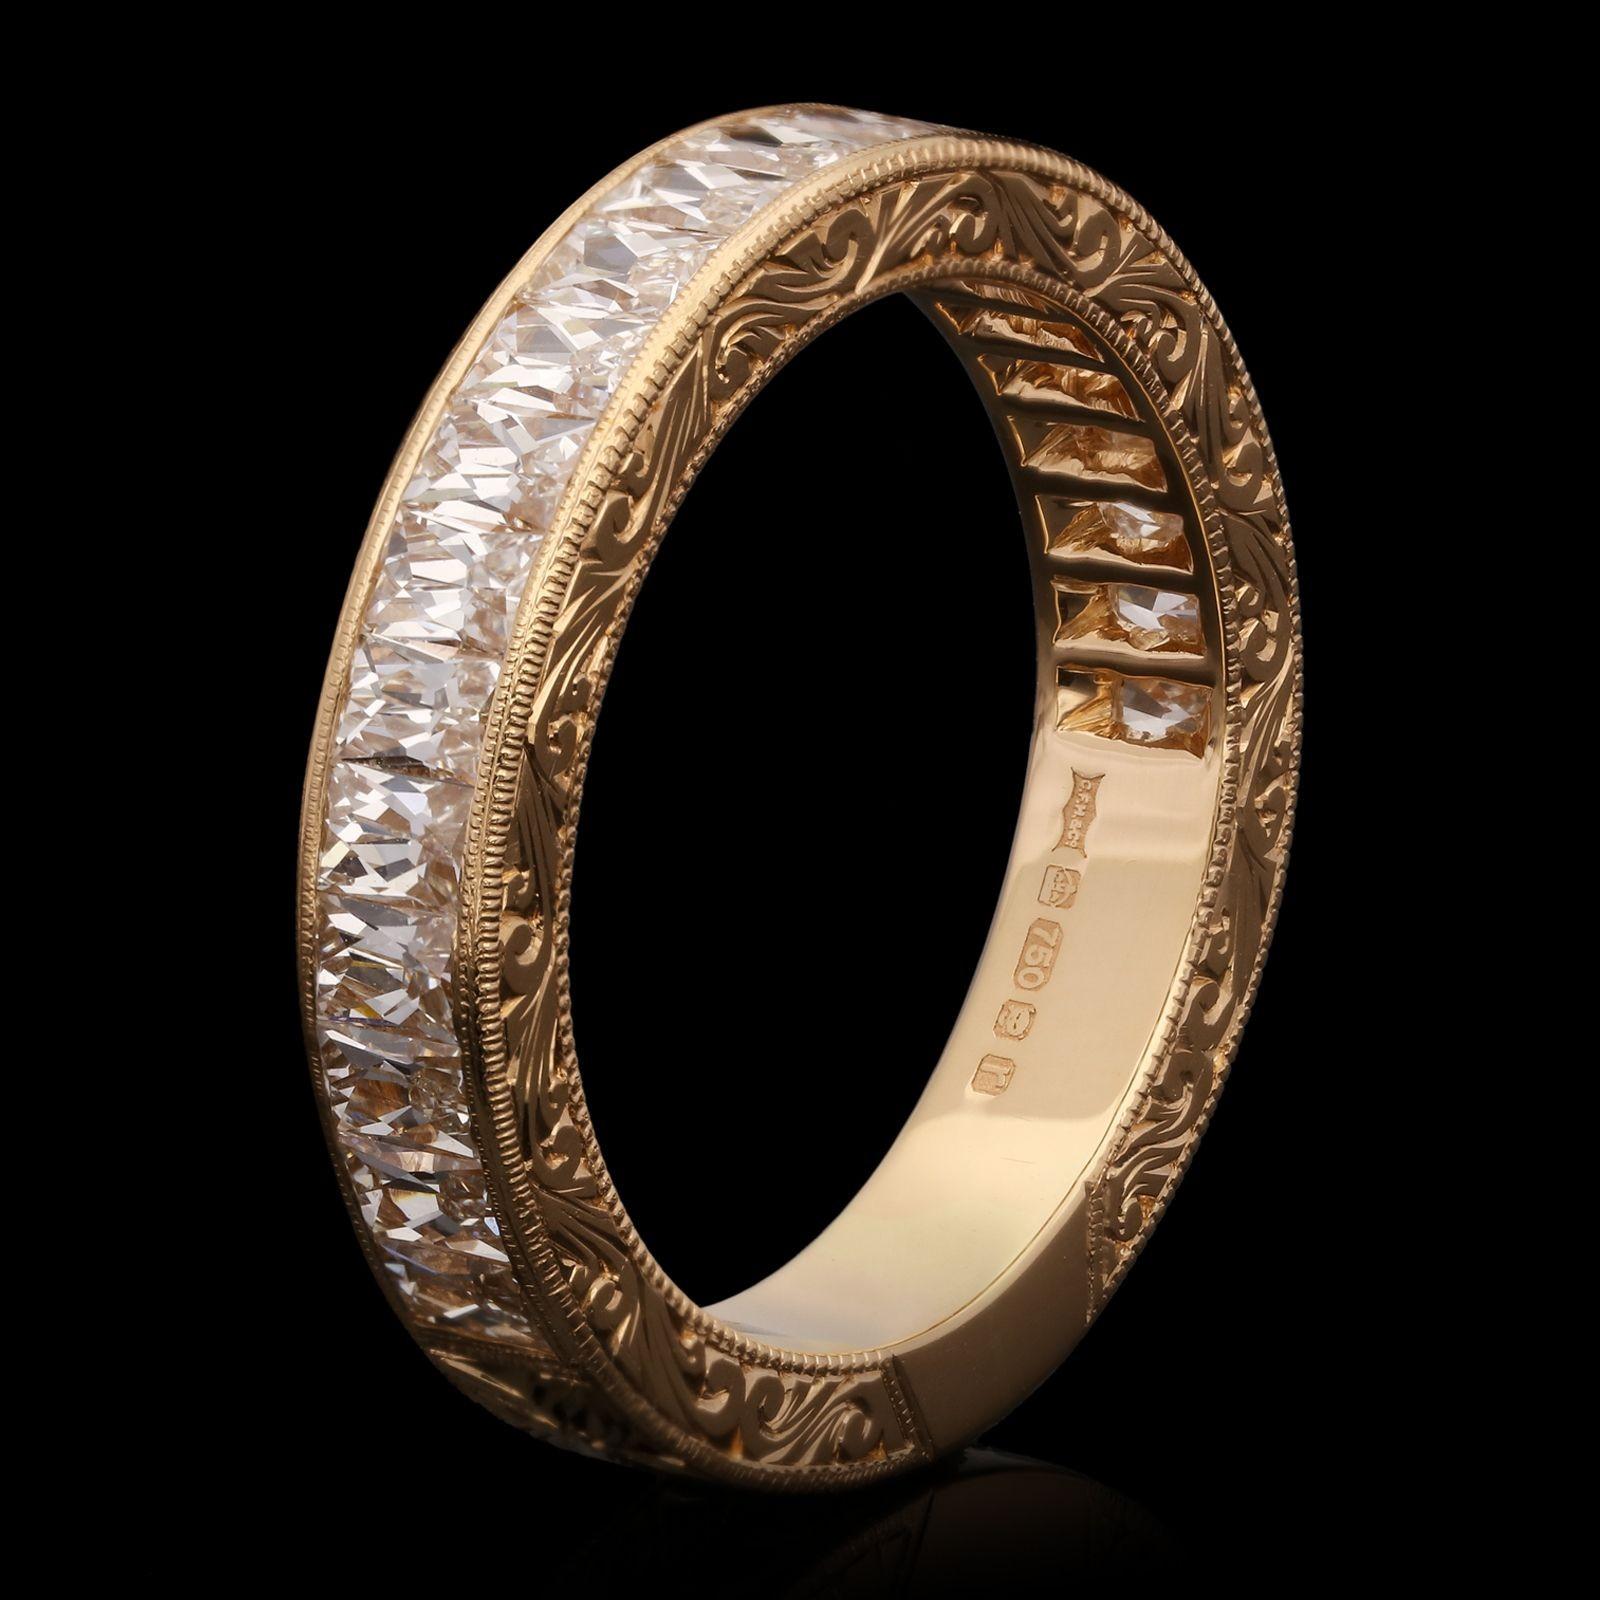 A stunning French-cut diamond and rose gold eternity ring by Hancocks, the ring three quarter set with beautiful rectangular French cut diamonds weighing a total of 1.50cts and of G colour and VS clarity set vertically within a finely crafted and